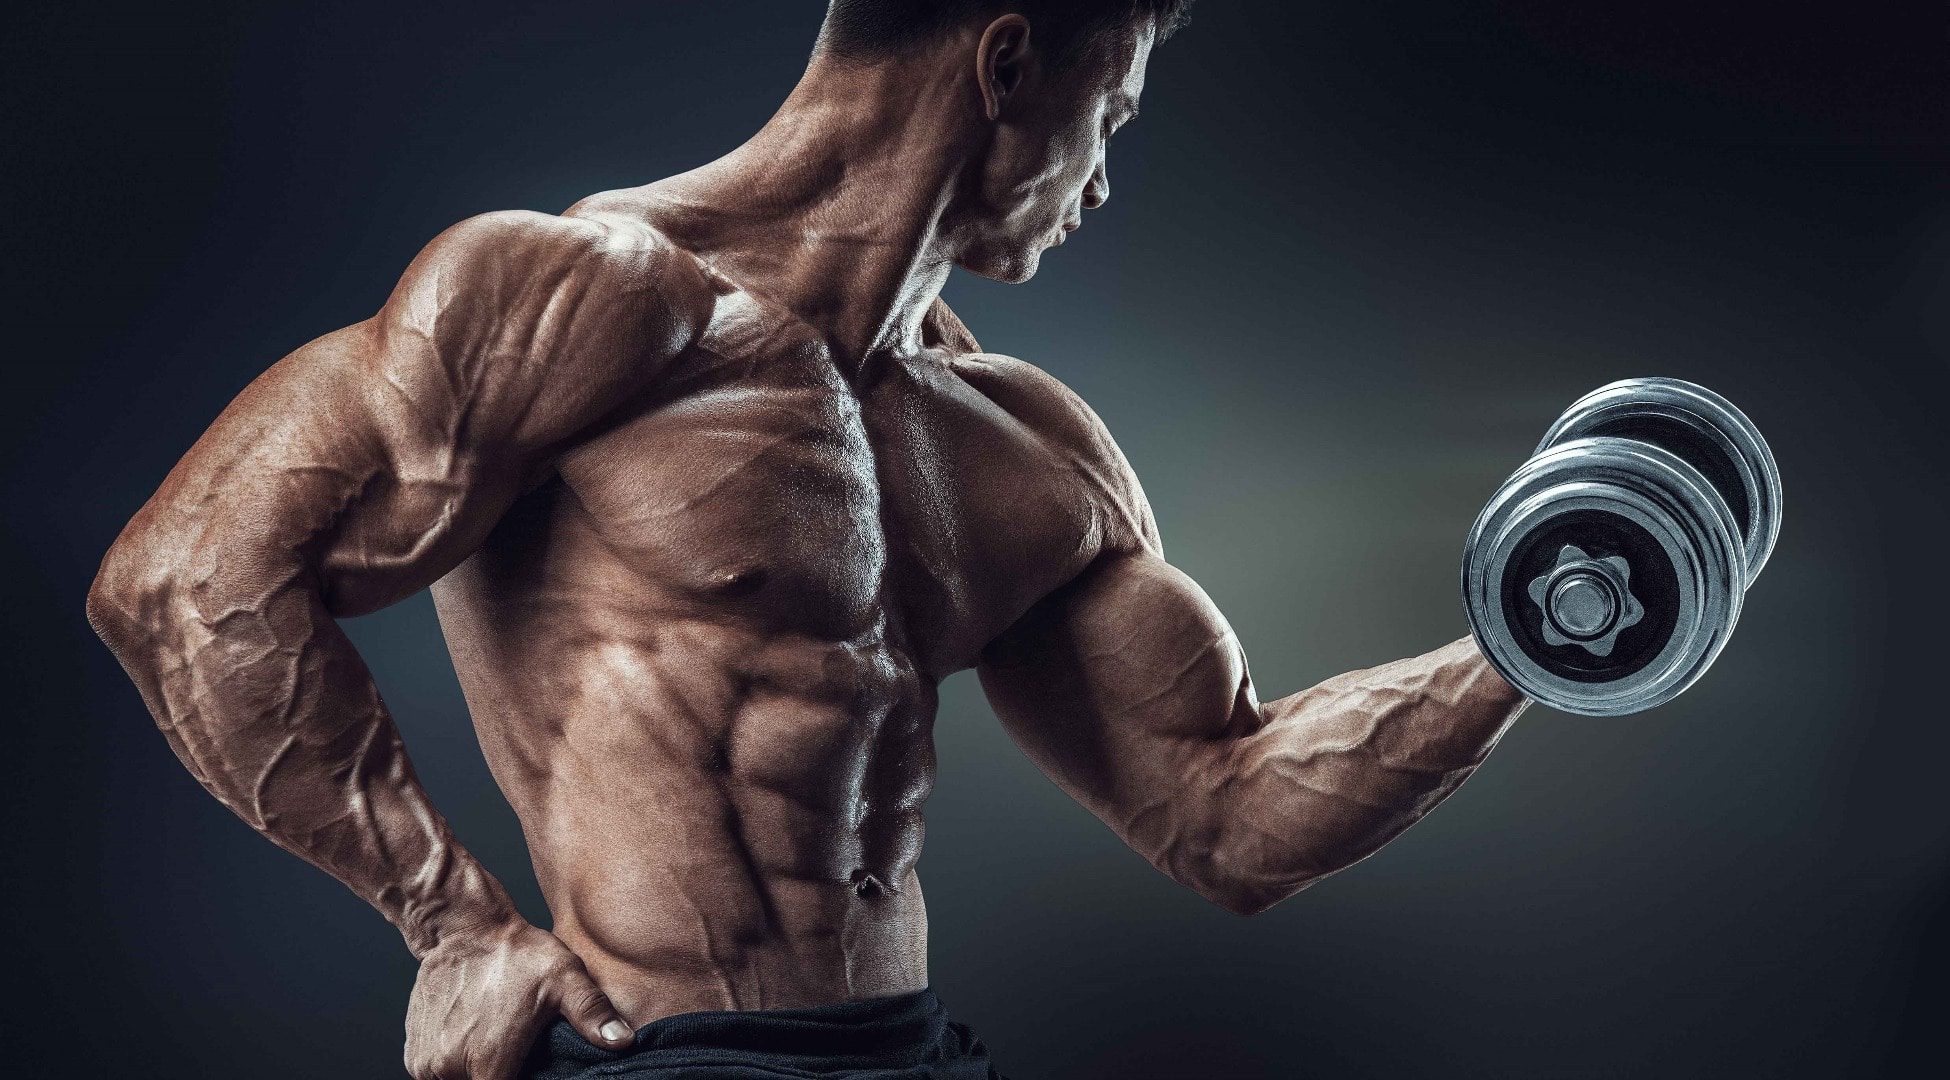 3 Science-Based Training Strategies That Help You Build Muscle Faster